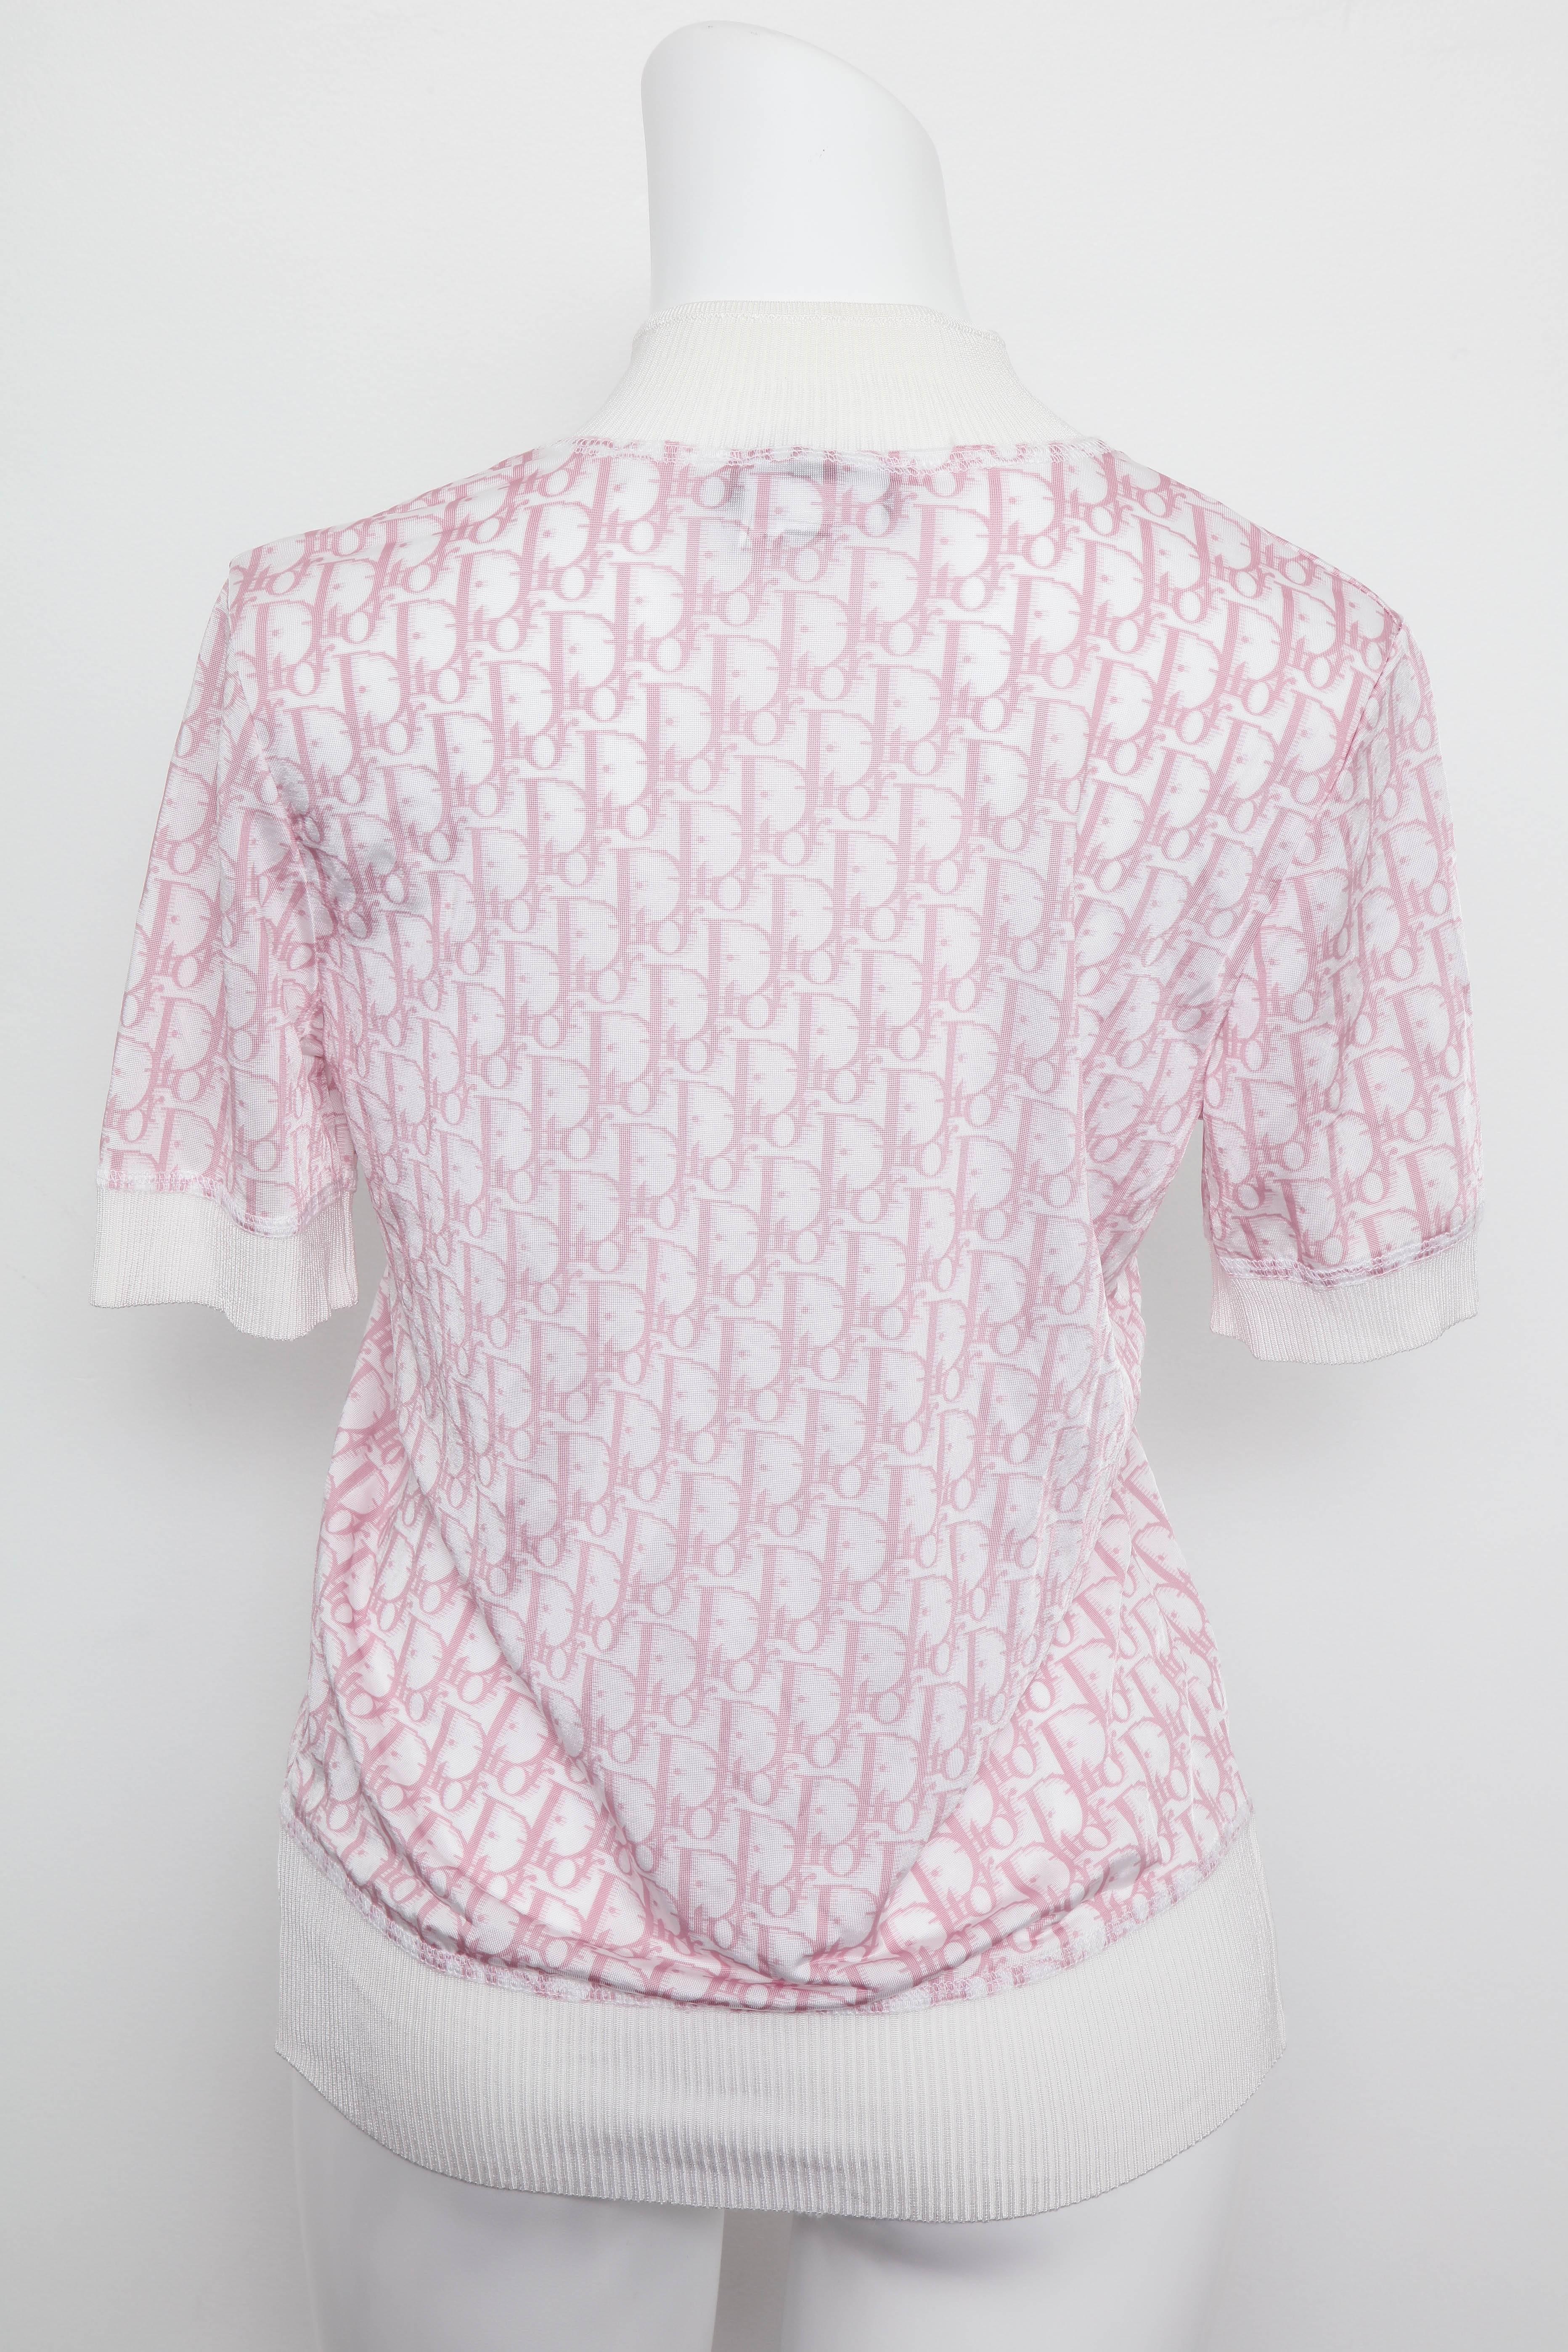 John Galliano for Christian Dior Pink Trotter Logo Shirt For Sale 1